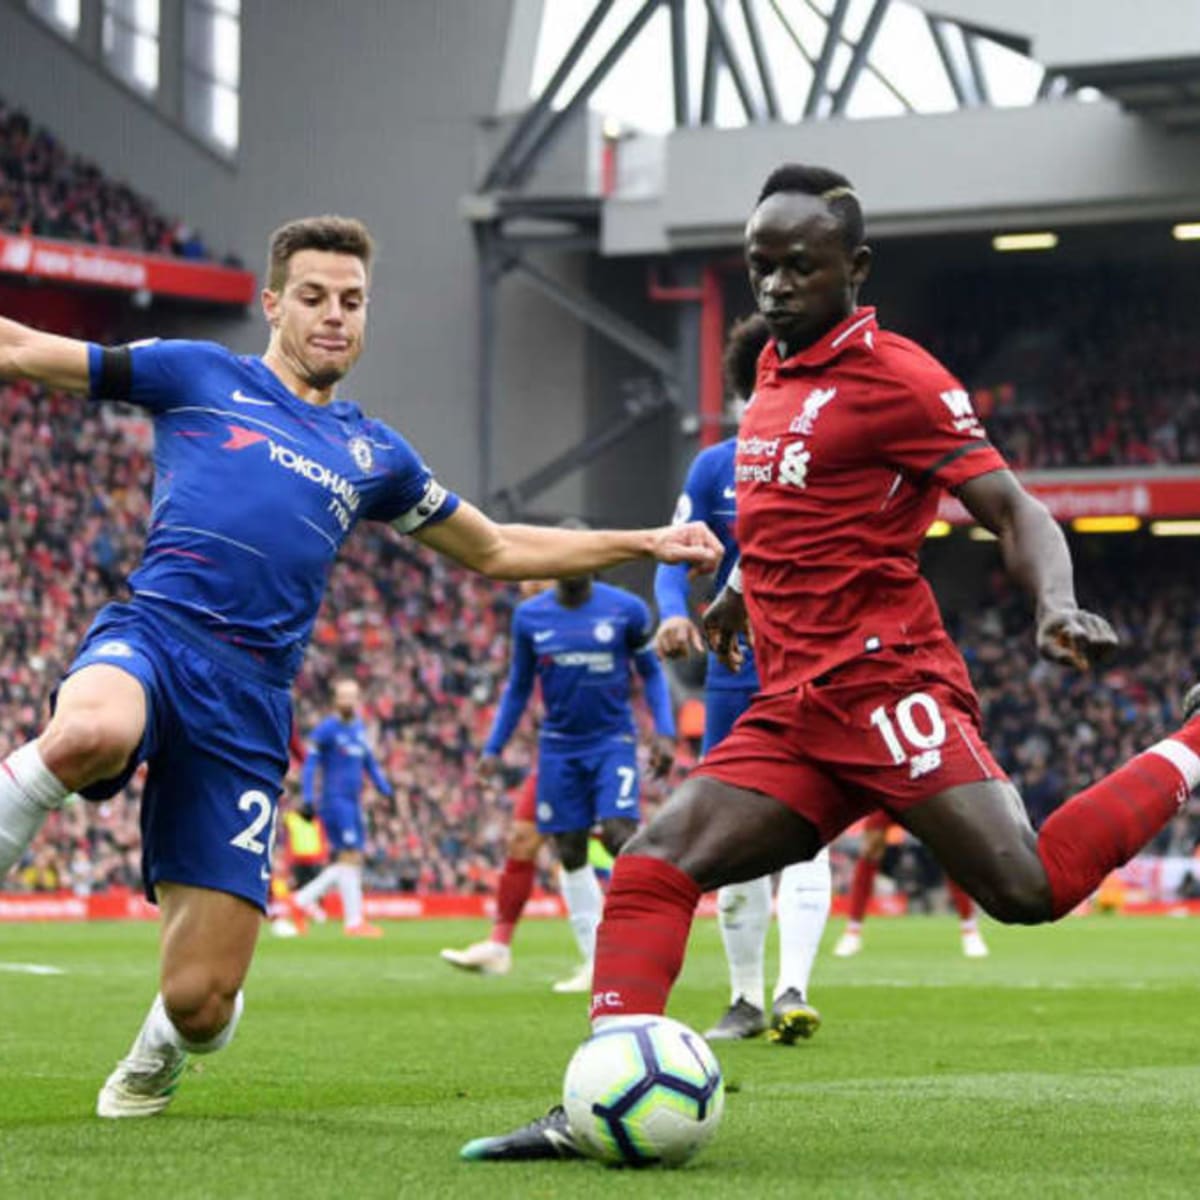 Liverpool vs Chelsea Preview Where to Watch, Live Stream, Kick Off Time and Team News